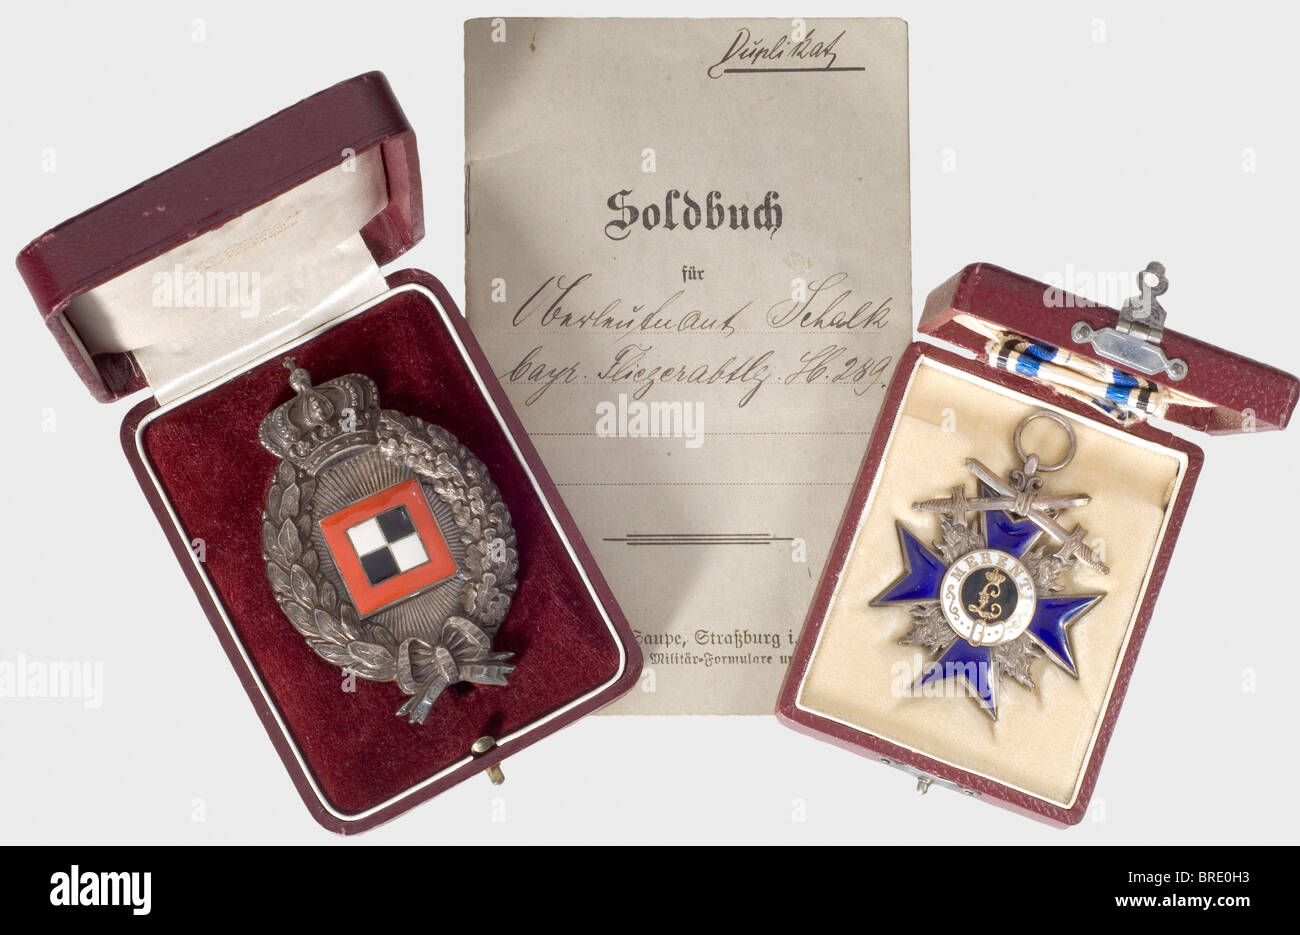 Oberleutnant Karl Schalk, Bavarian Flight Detachment (A) 289, decorations, award certificates, documents and photographs Bavarian Badge for Aviation Observation Officers, hollow backed silver issue with pinned devices in coloured enamel, punched 'Karl Pöllath - Schrobenhausen - Silber' on the fluted reverse plating. In a wine red case with gold stamping on the lining cover 'Carl Poellath - k. b. Hoflieferant - Schrobenhausen'. Possession document no. 334 dated 27 October 1917 (with Kb RIR 5). Iron Cross 2nd Class of 1914, in a black award p historic, historical, Stock Photo